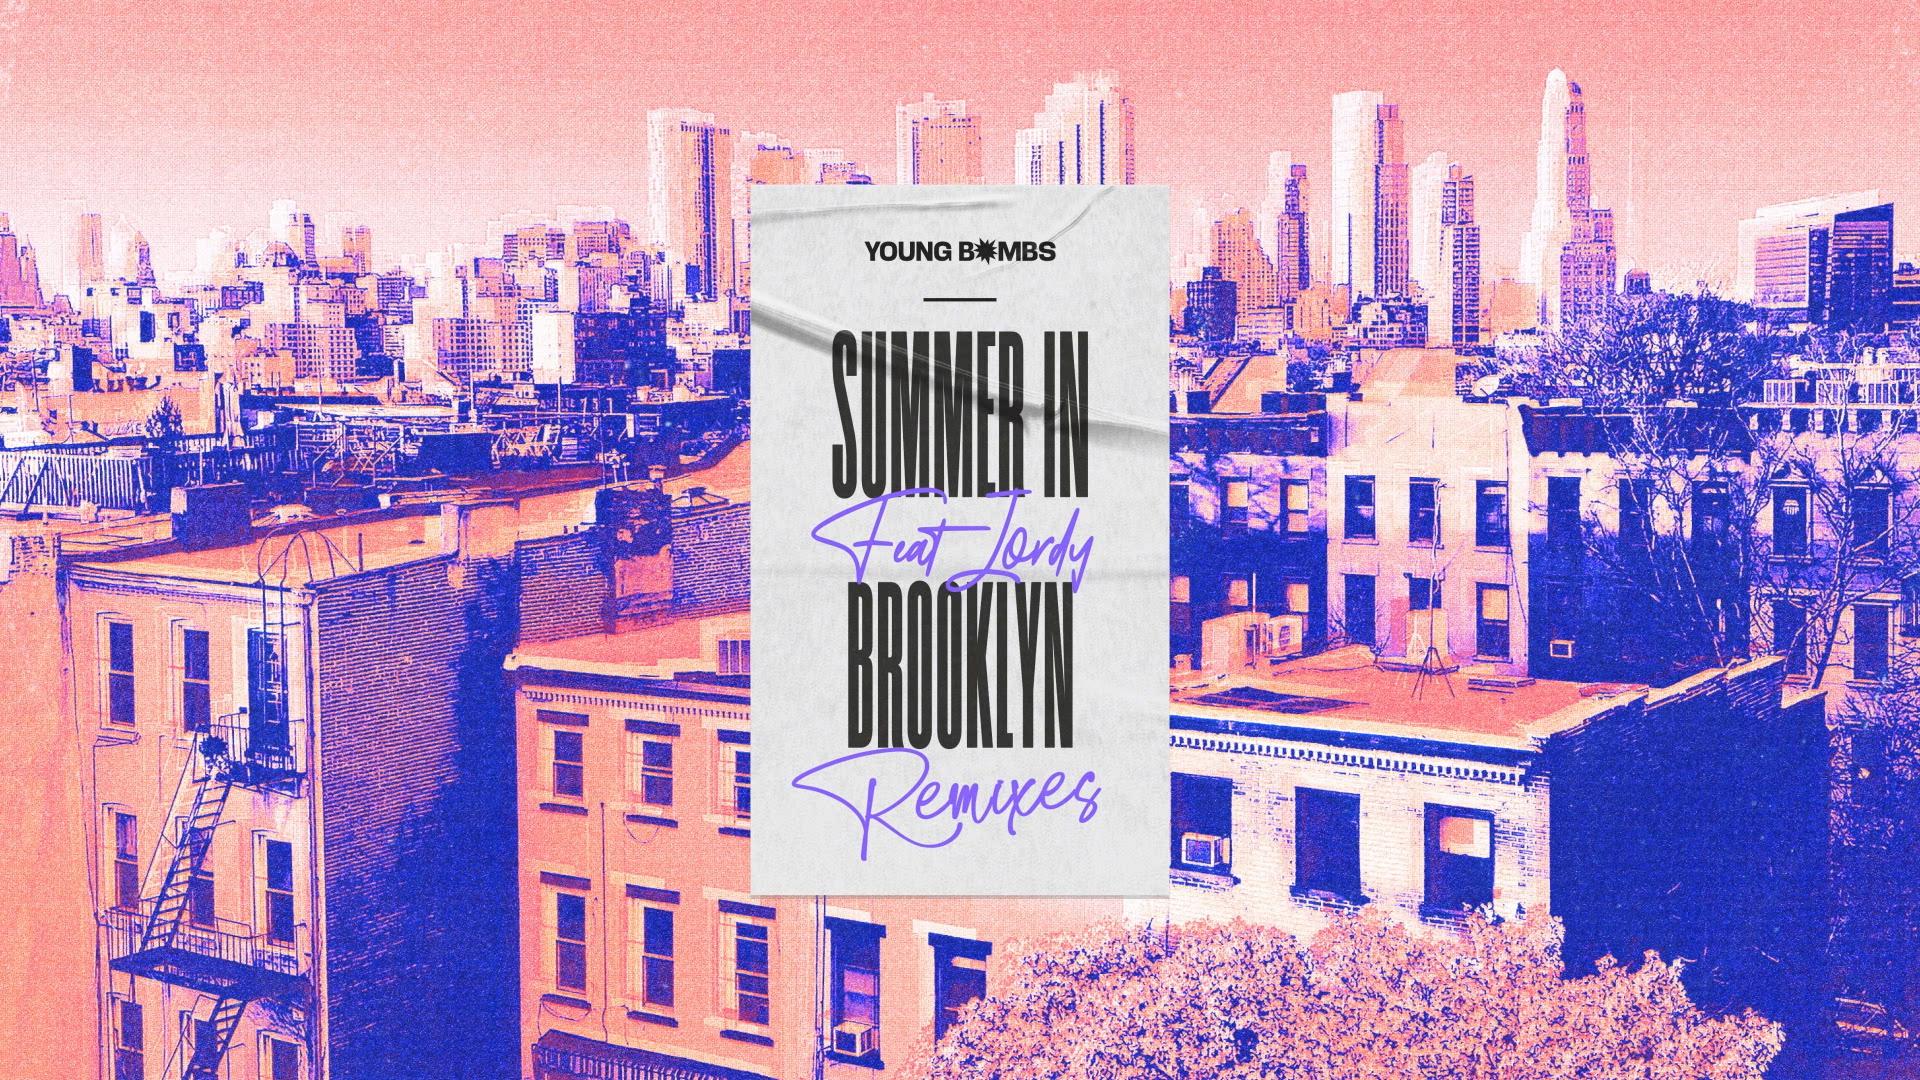 YOUNG BOMBS - Summer in Brooklyn (Sonickraft Remix) (Visualizer)